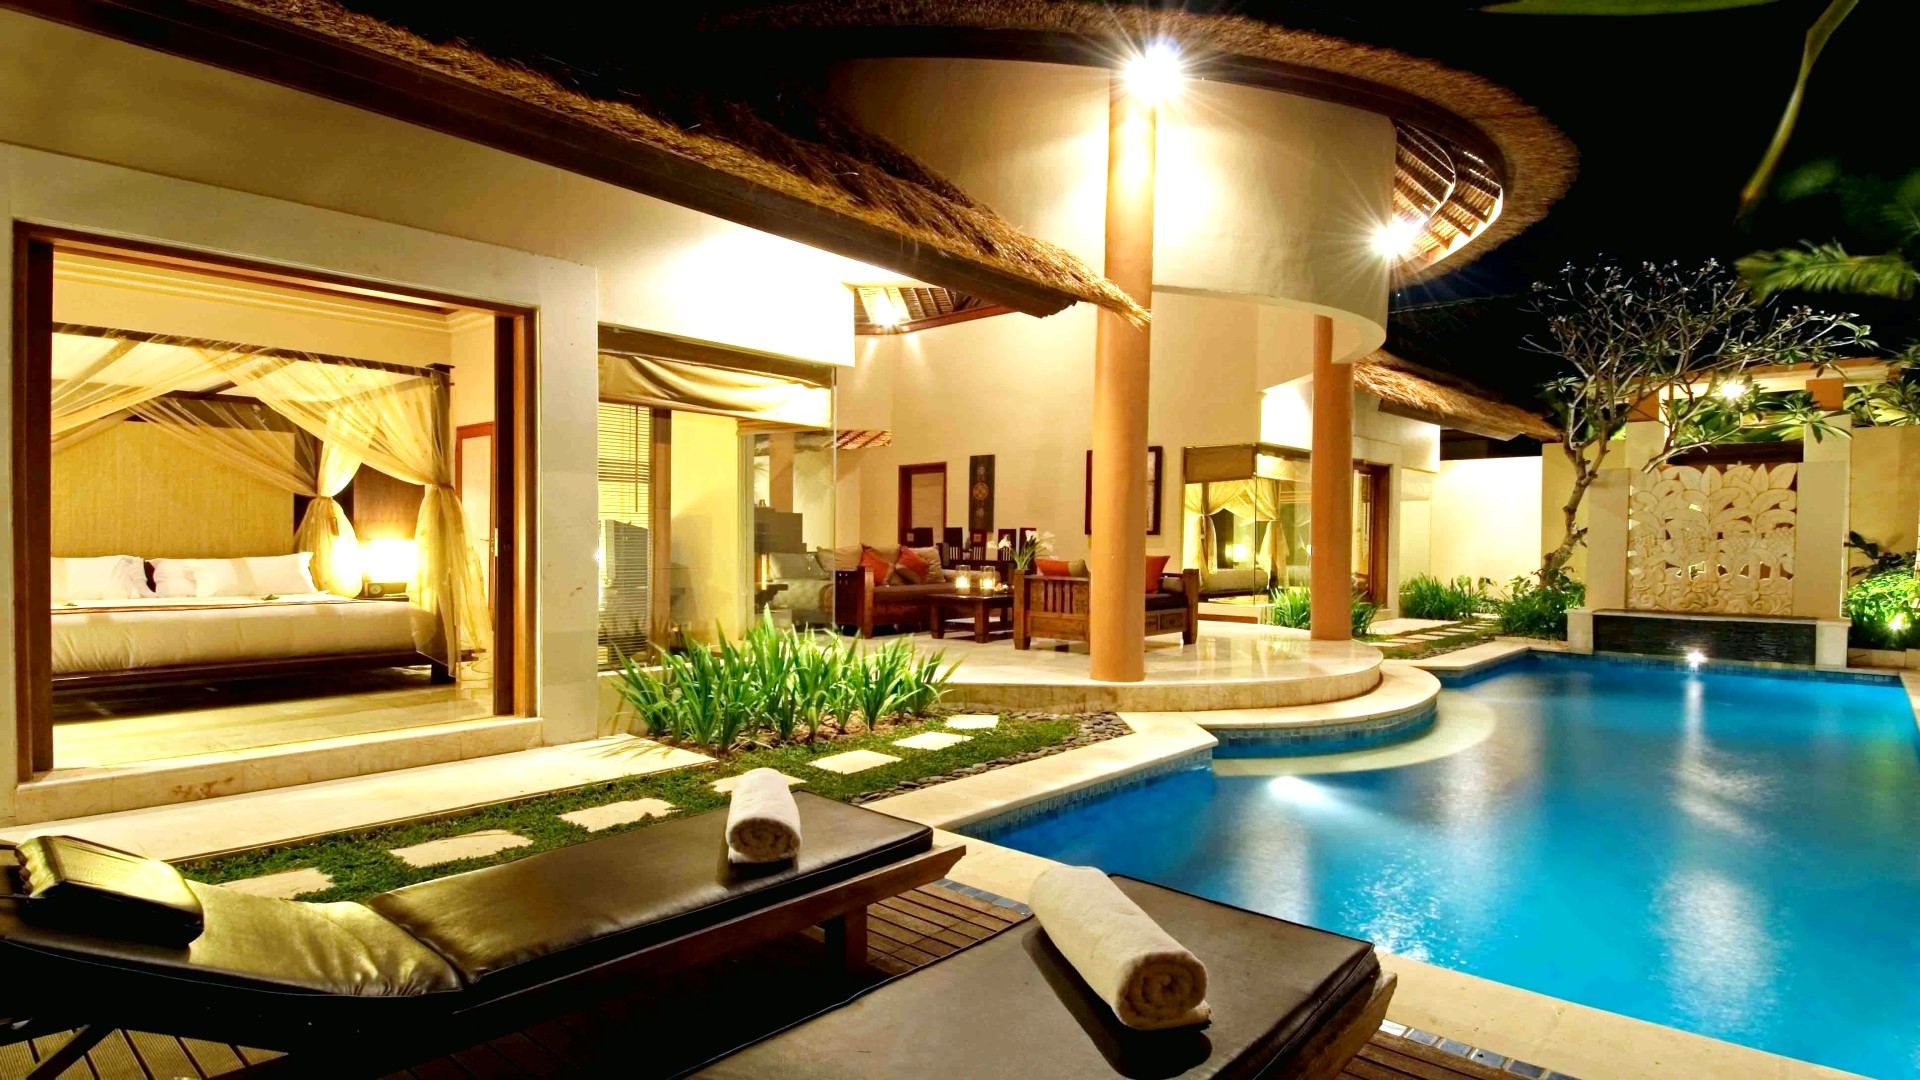 picture: sofas, wallpapers, deck chairs, evening, water, villa, table, night, sun loungers, pool, wallpaper (image)